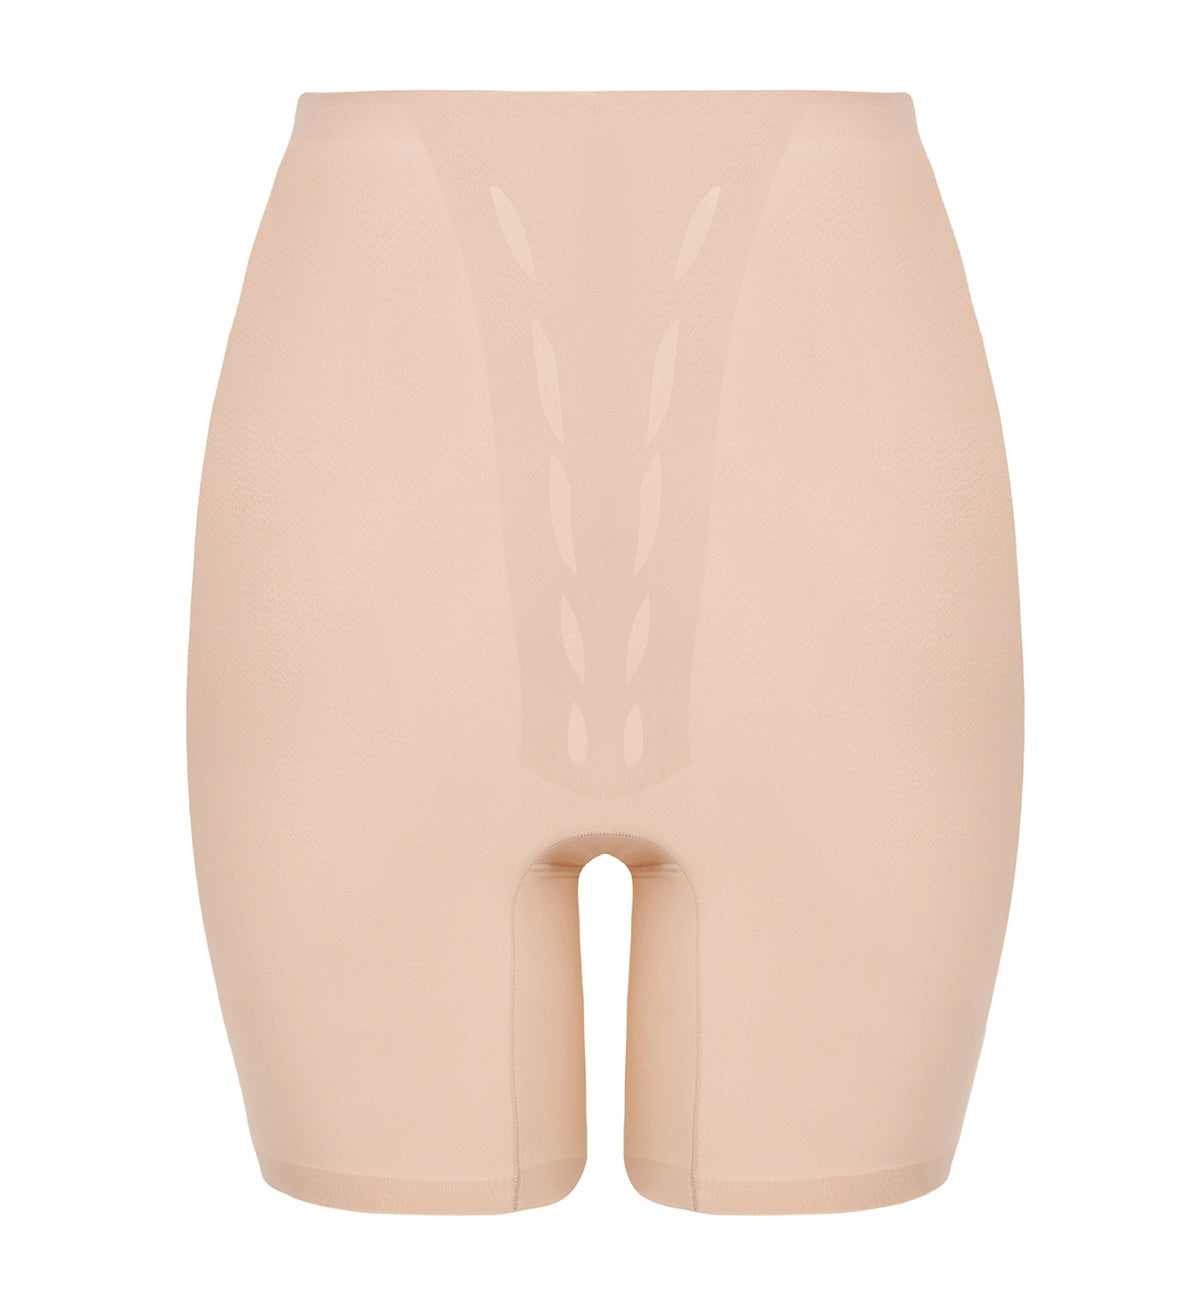 Spanx Everyday Seamless Shaping High Waisted Brief in Beige